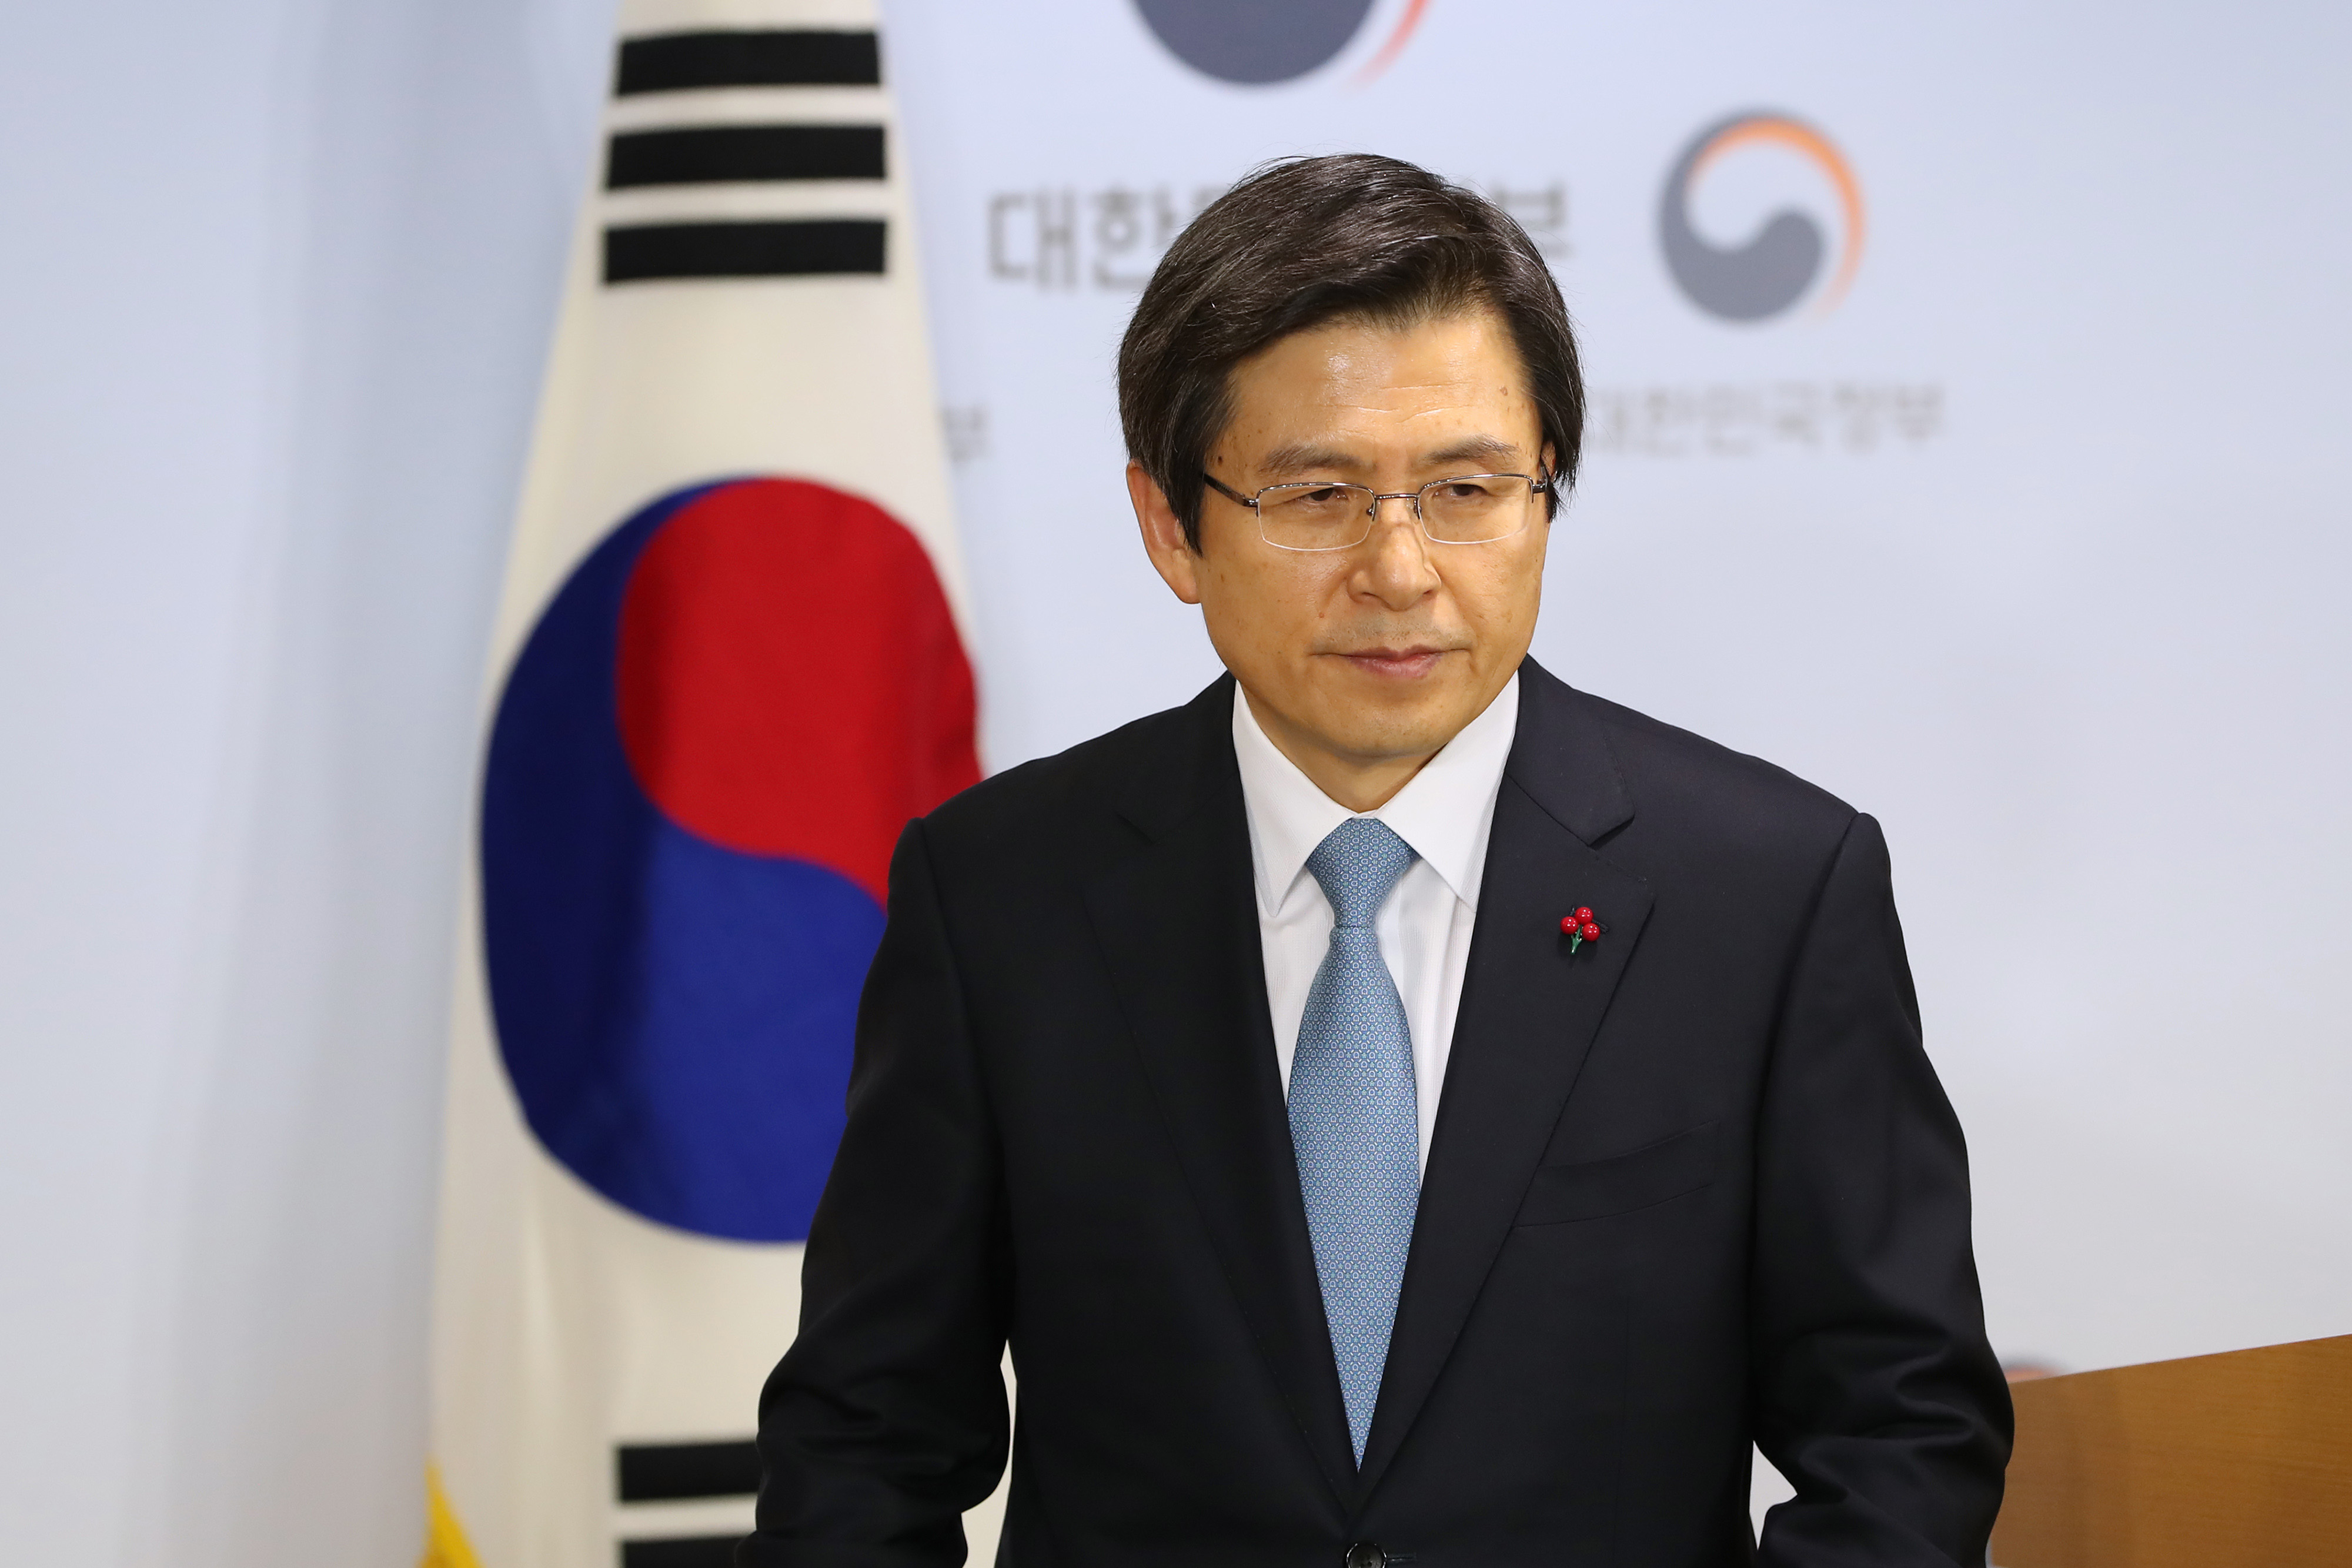 Hwang Kyo-ahn, South Korea's prime minister, departs a news conference in Seoul, South Korea, on Friday, Dec. 9, 2016. (SeongJoon Cho—Bloomberg via Getty Images)